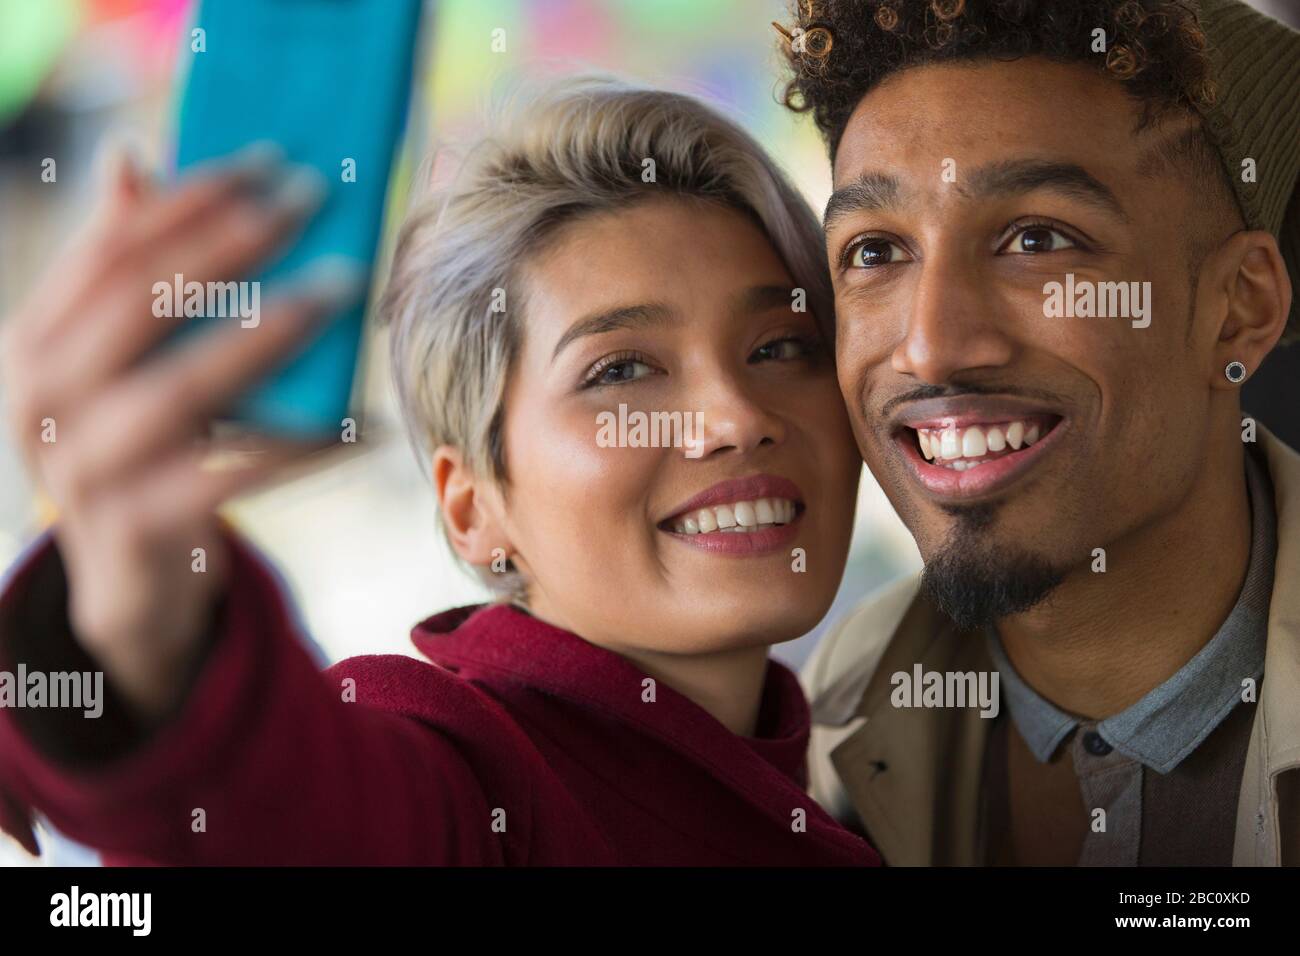 Smiling young couple taking selfie with camera phone Stock Photo